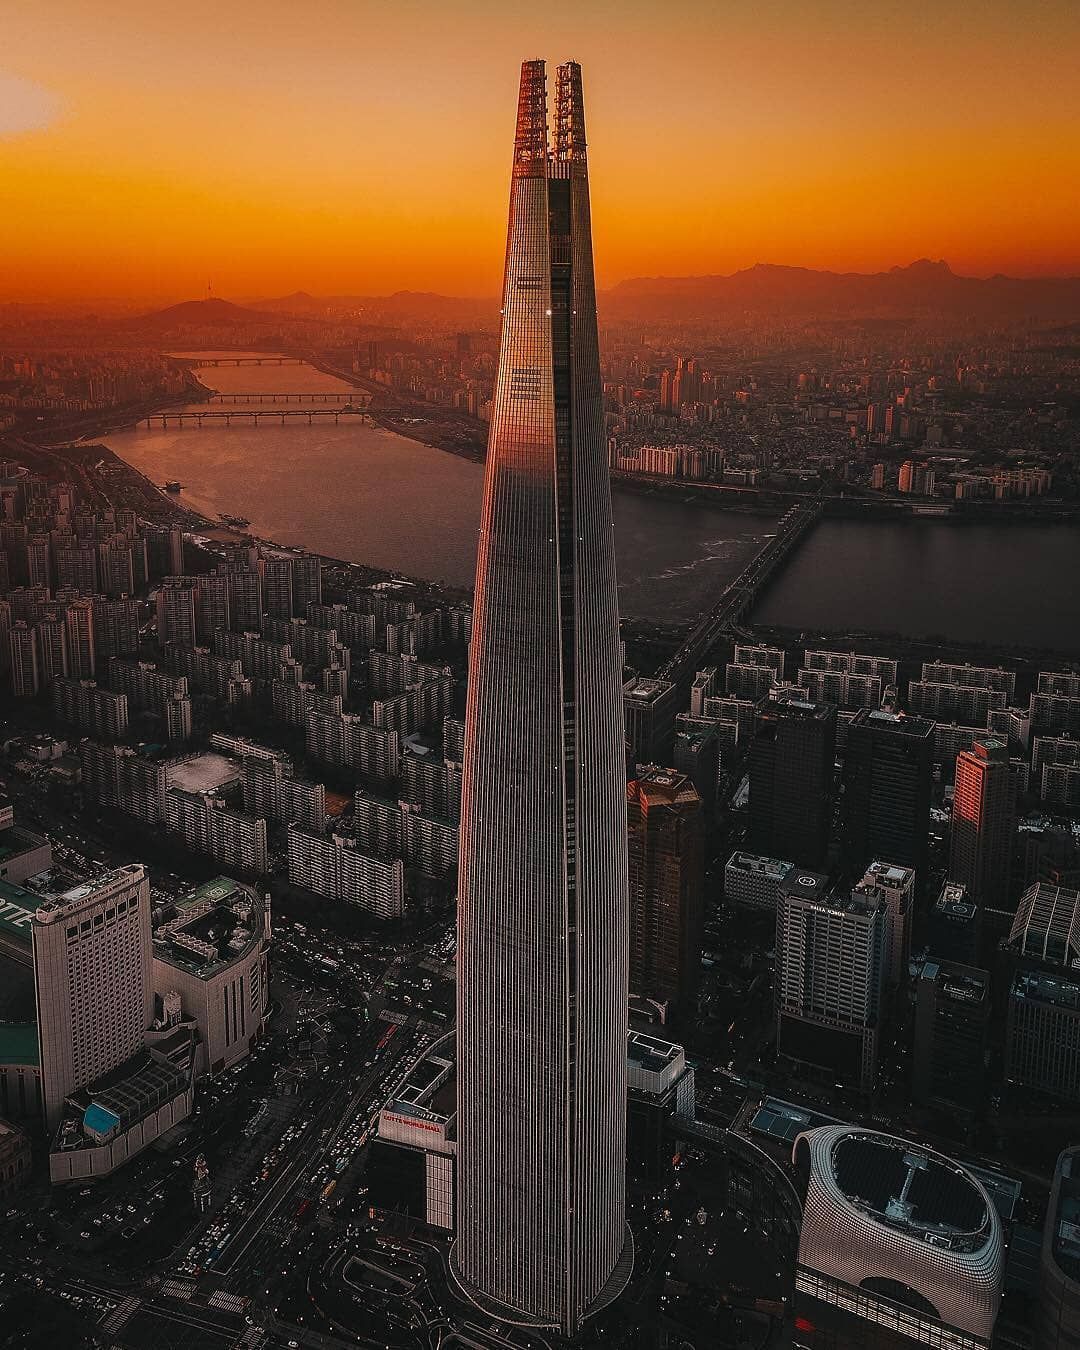 New The 10 Best Travel (with Picture) World Tower. It's